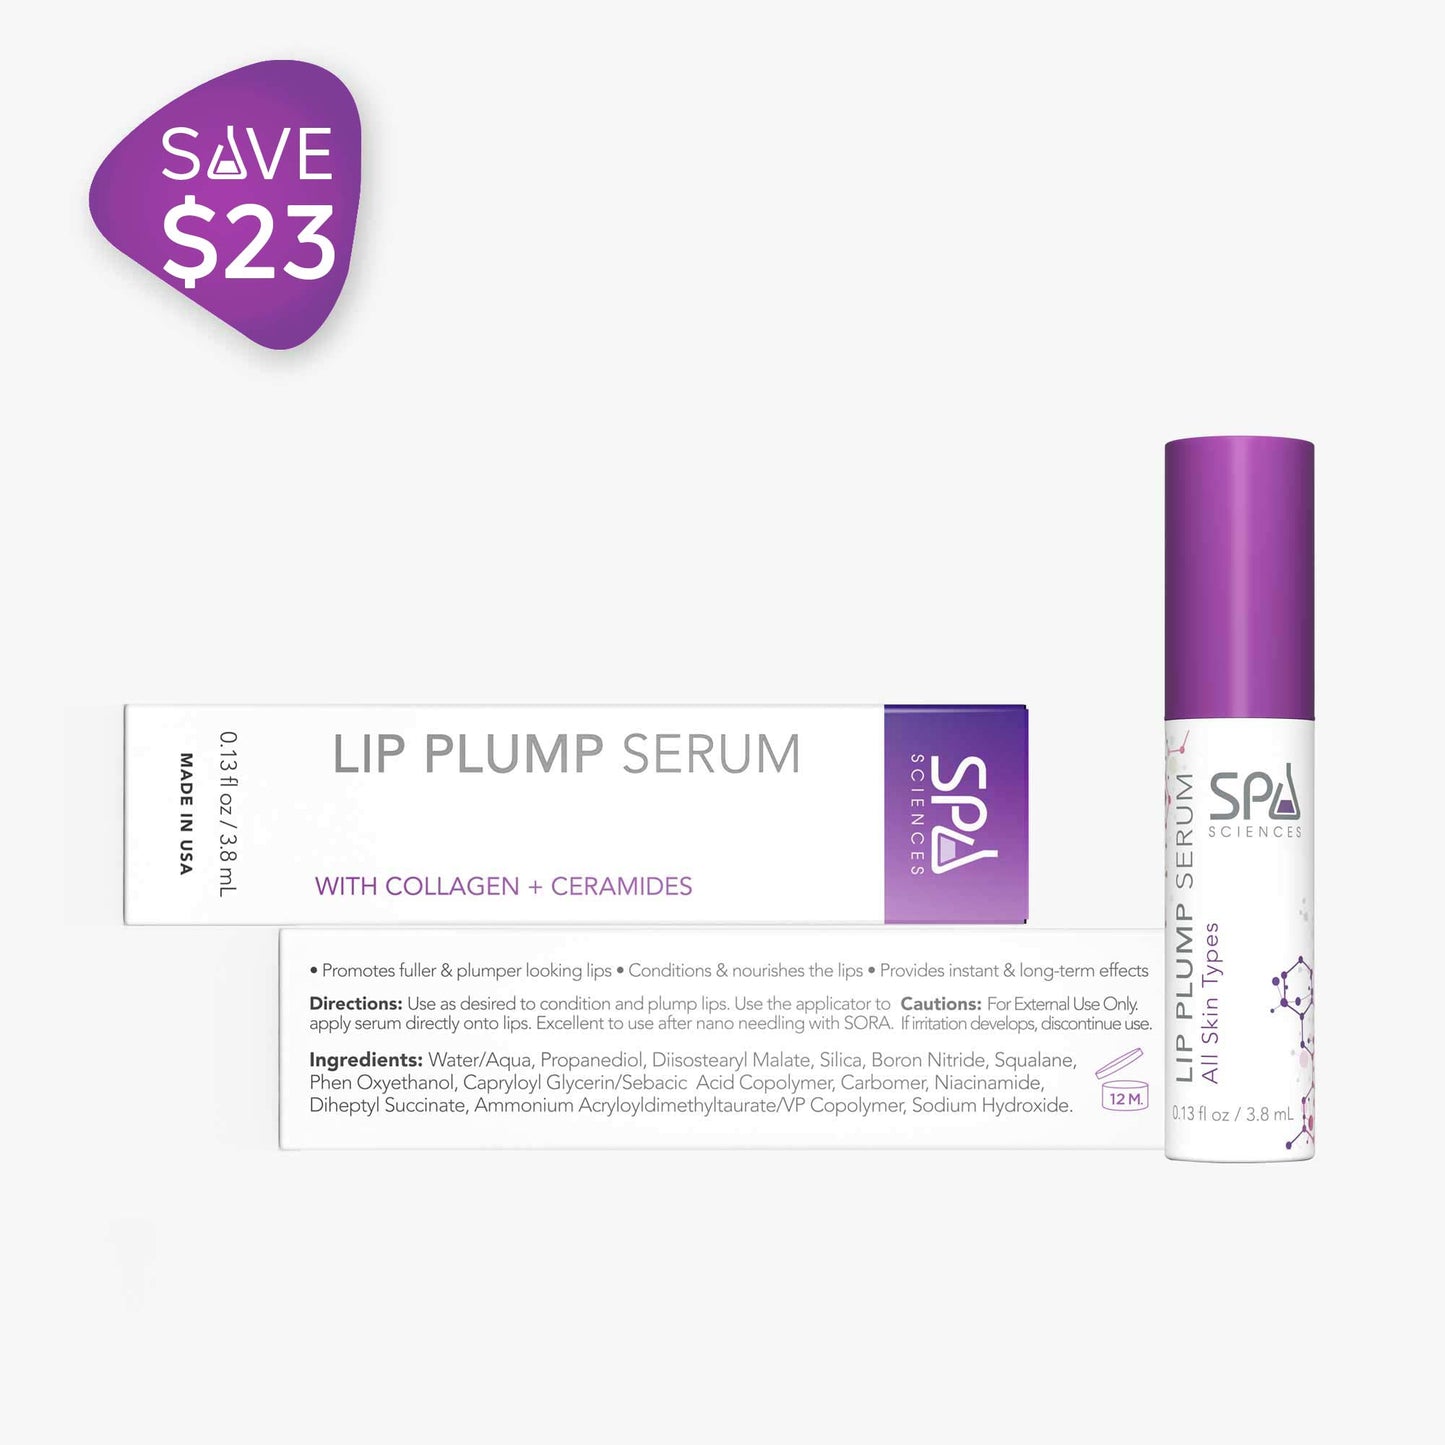 Organic Eyes & Lips plump serum with a purple bottle by Spa Sciences.